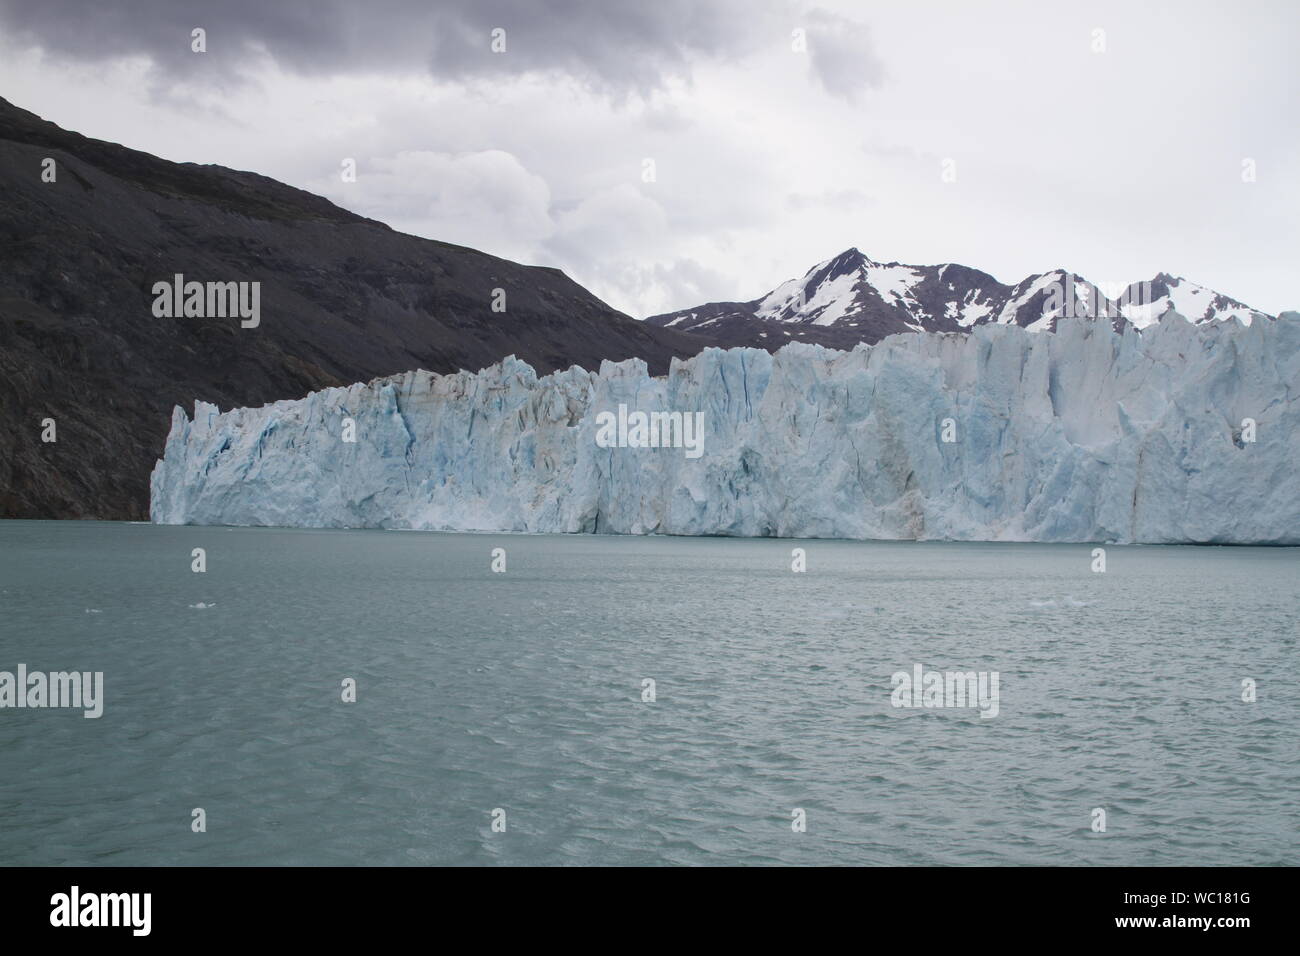 Ice Formation In River At Ohiggins Glacier Against Mountains Stock Photo